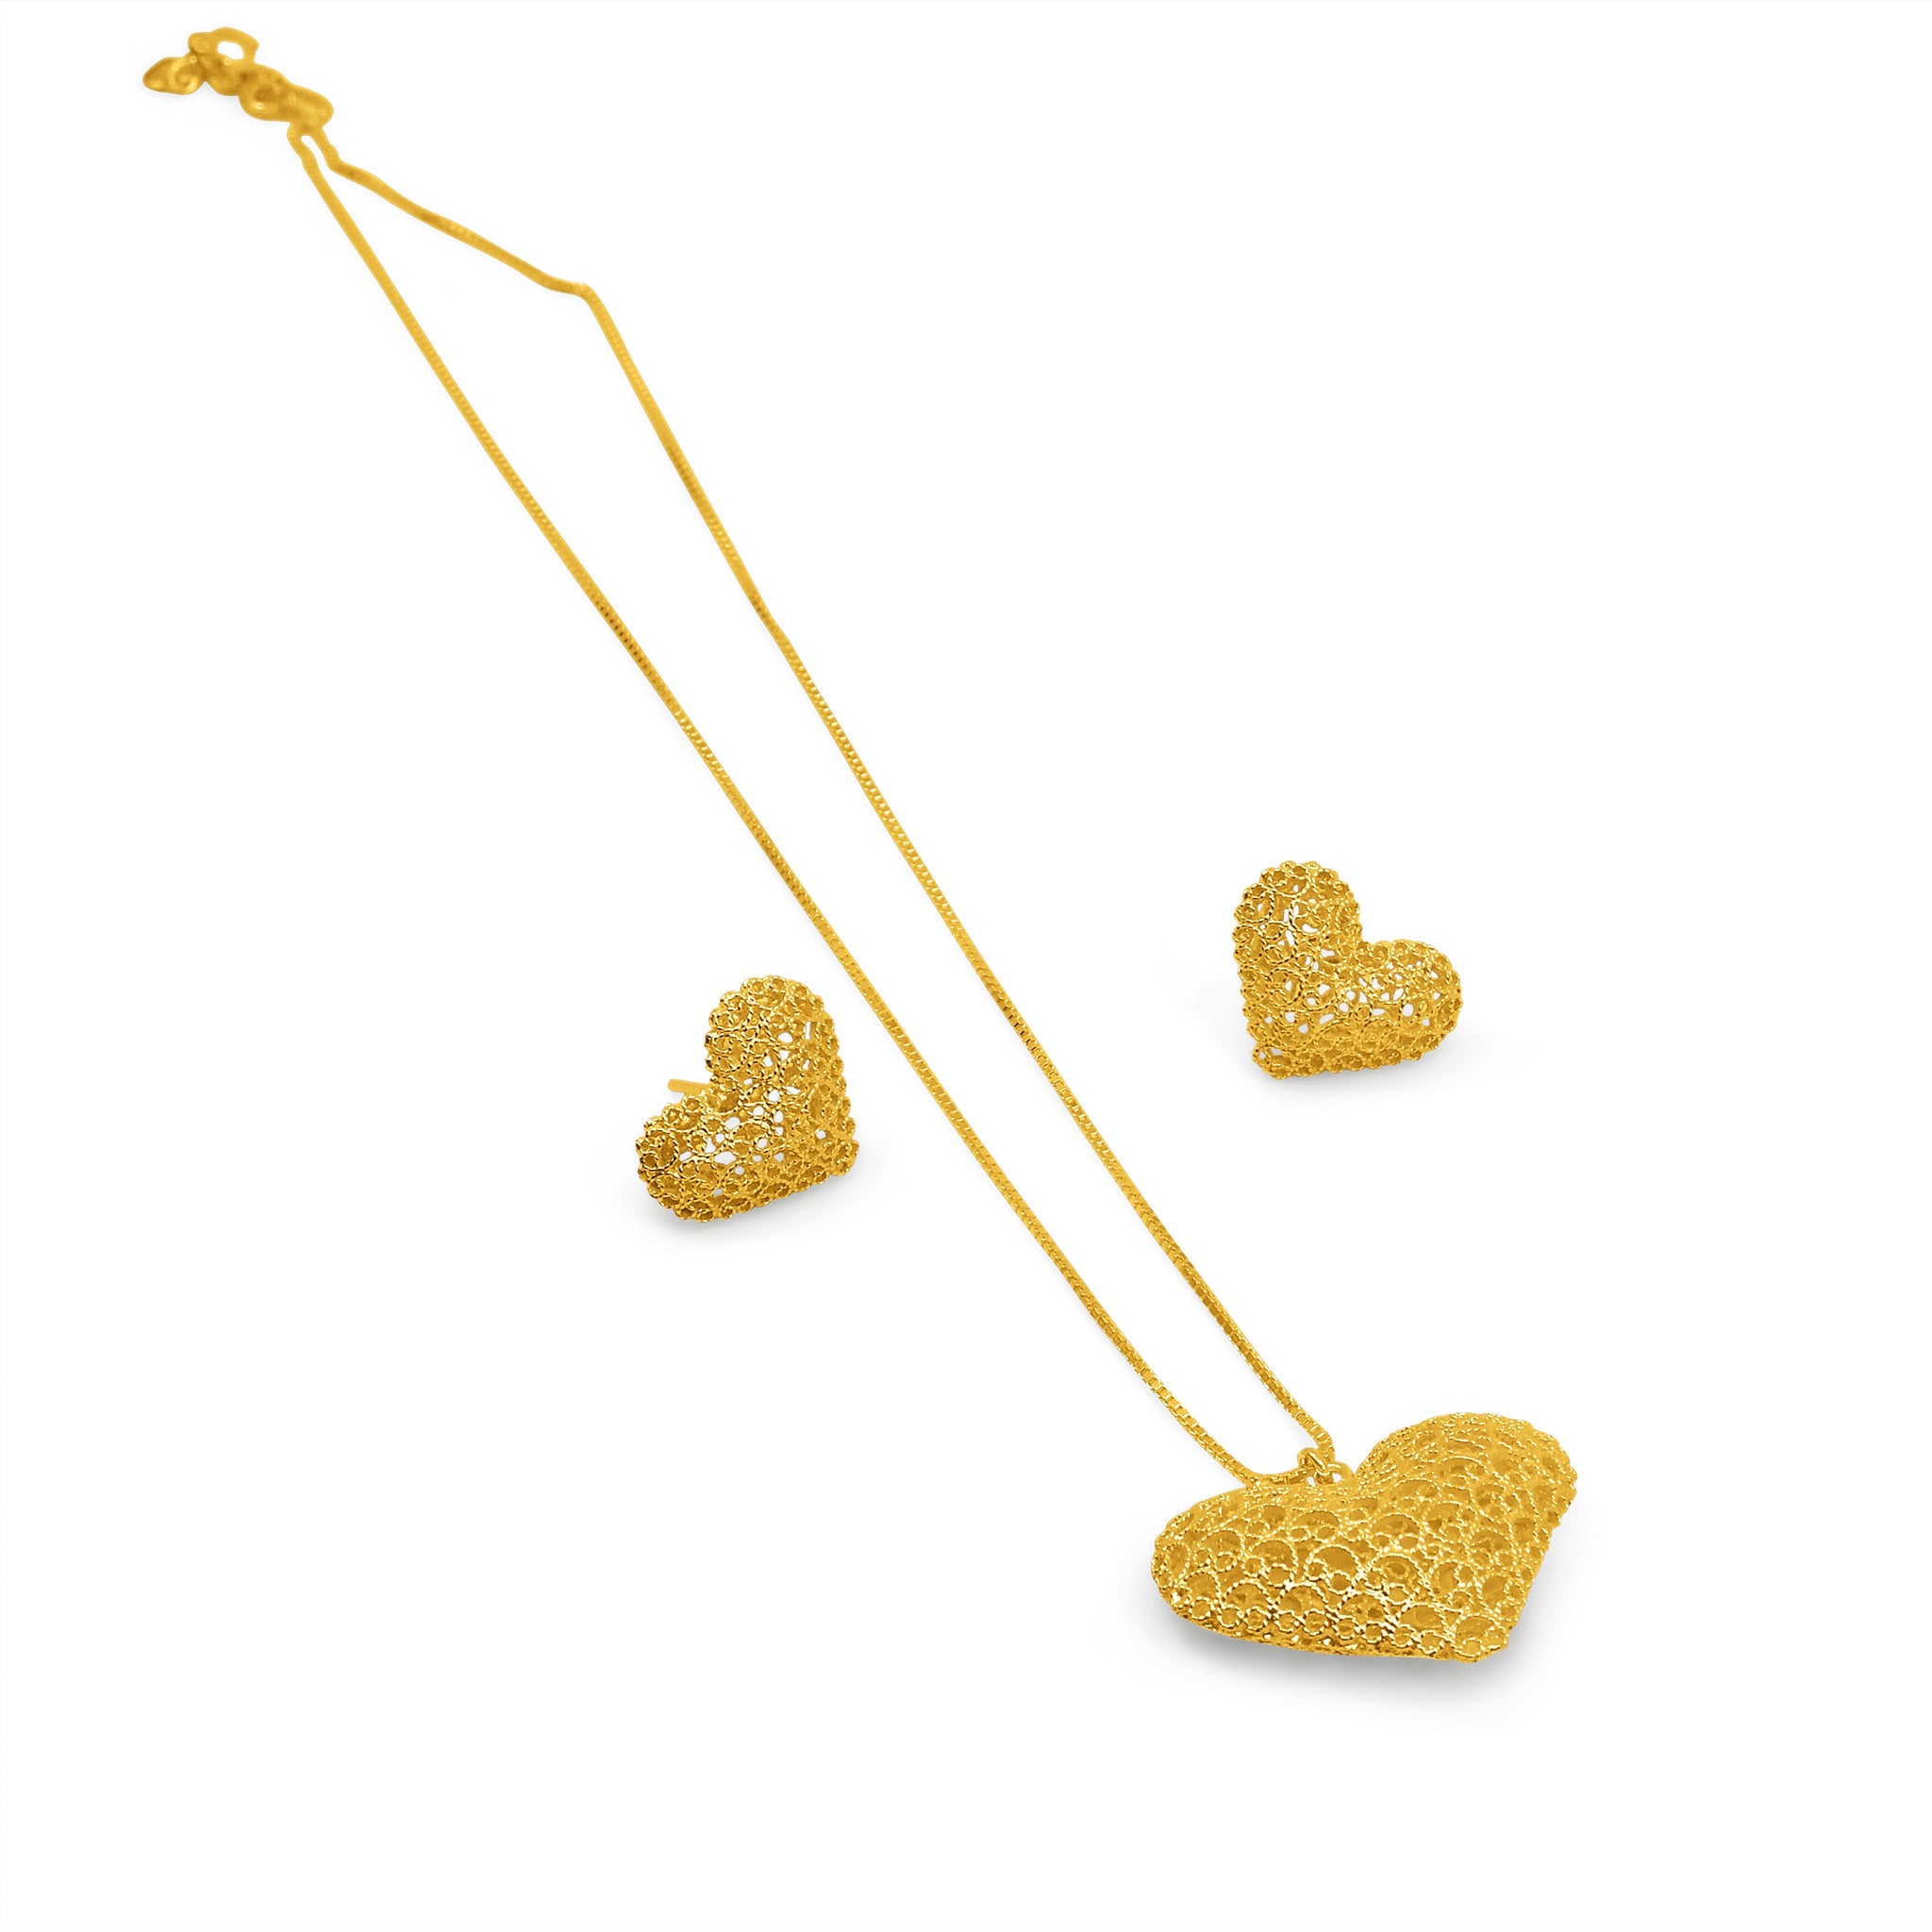 KATE GOLD HEARTS SMALL PENDANT NECKLACE FILIGREE